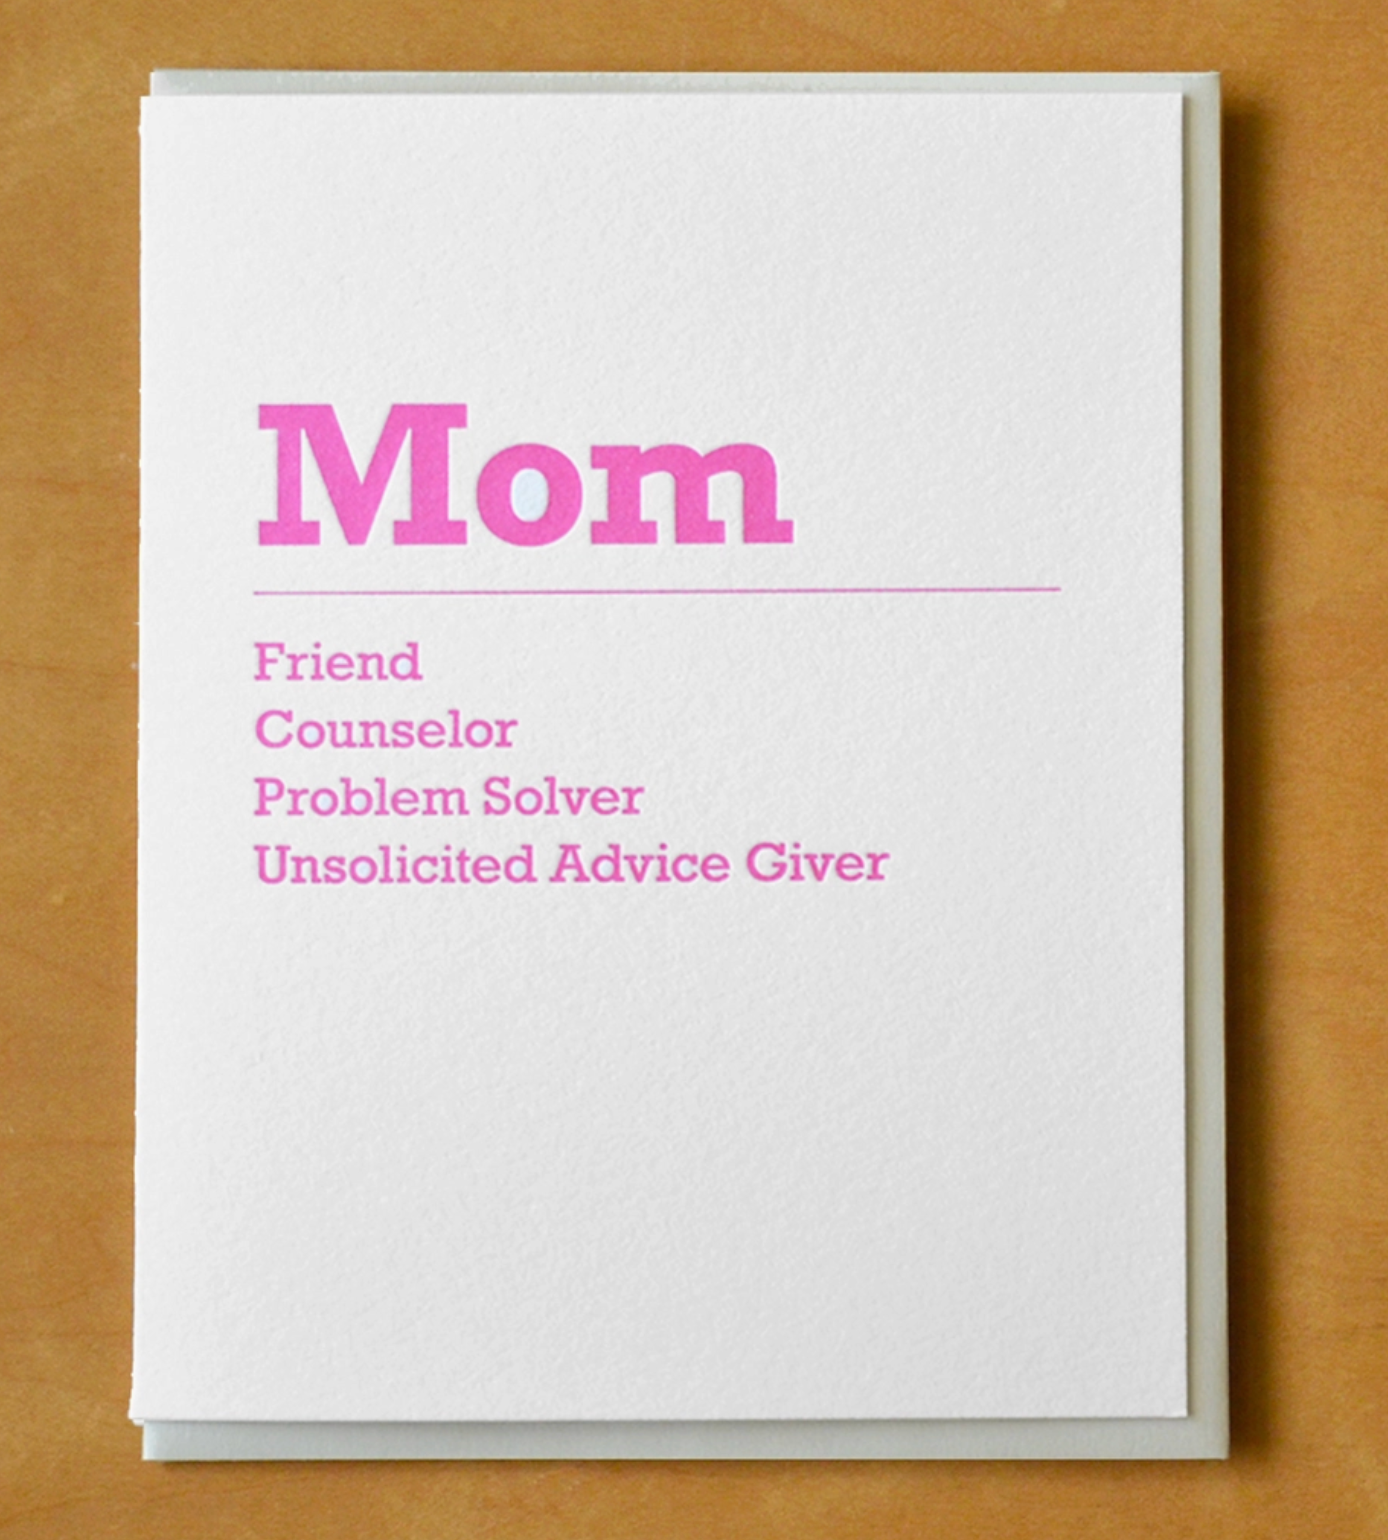 Mom Friend Counselor Problem Solver Unsolicited Advice Giver Card